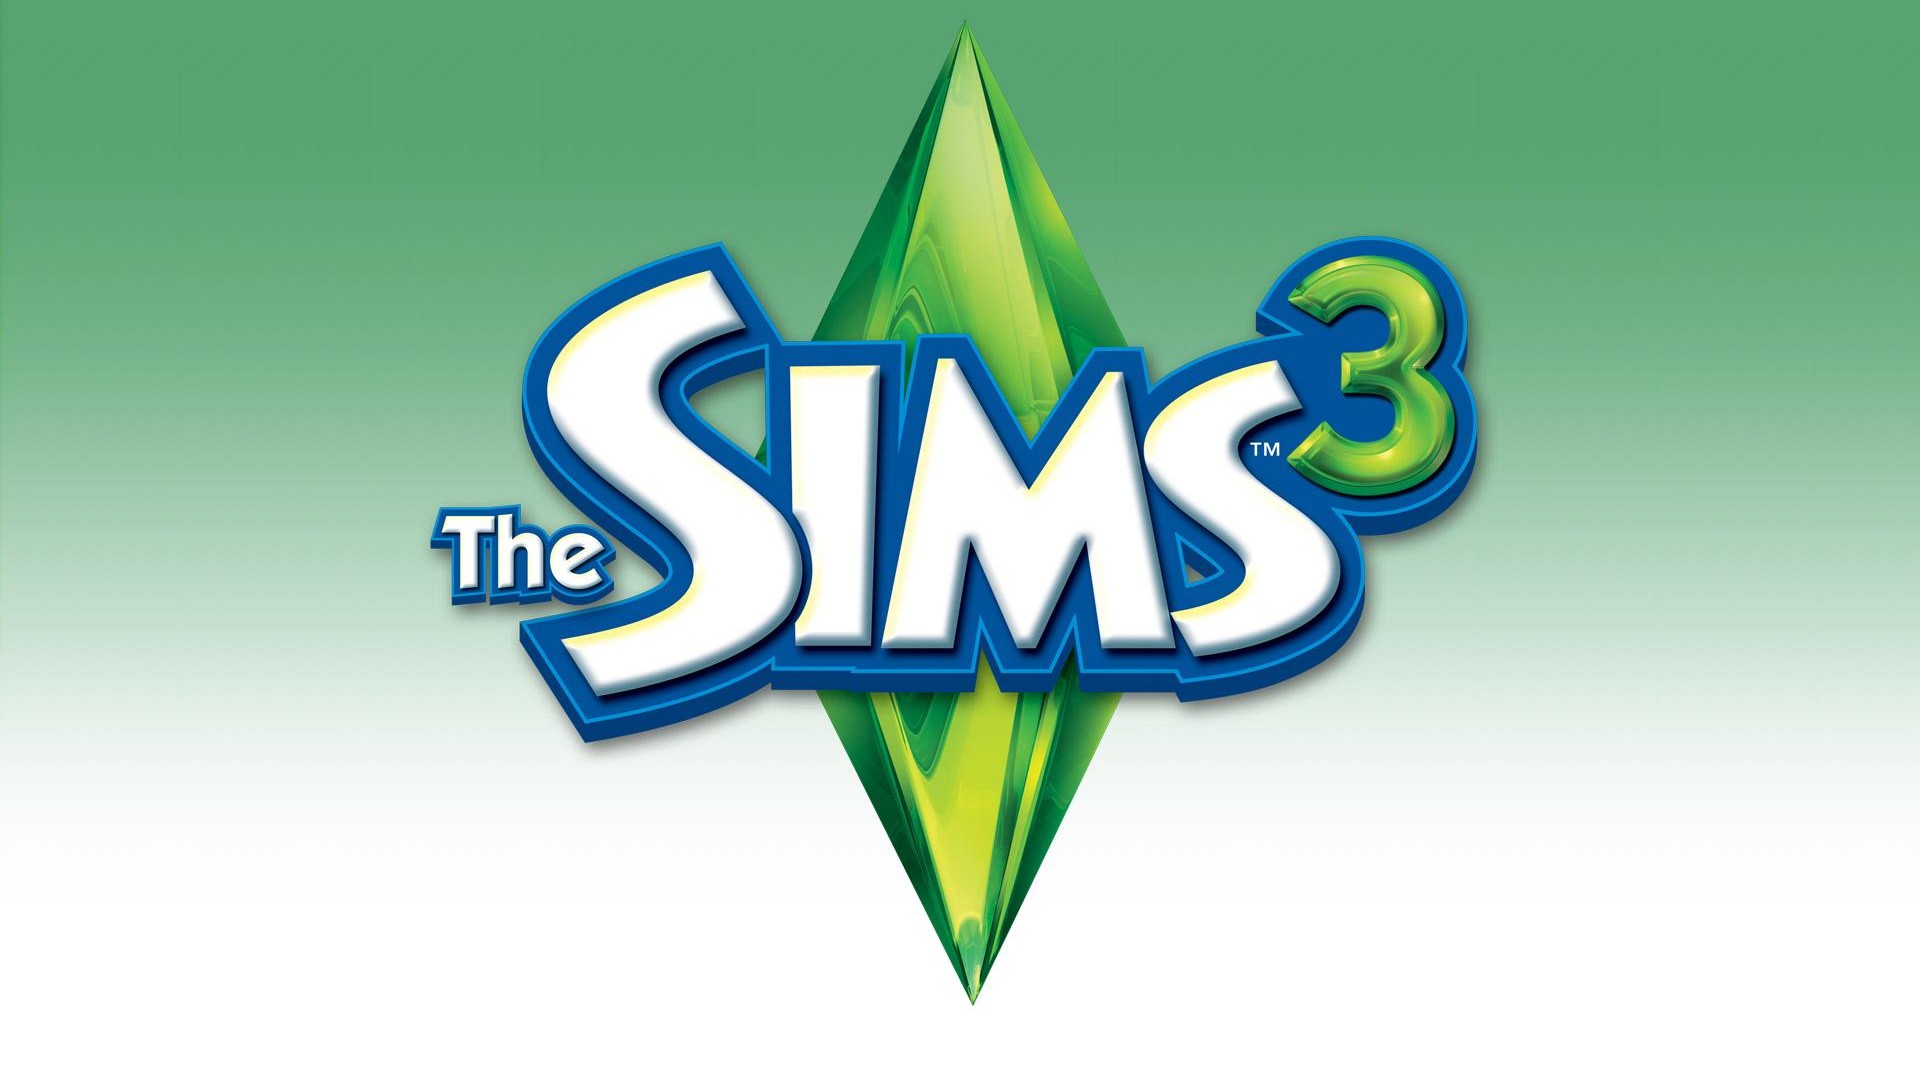 Video Game The Sims 3 1920x1080